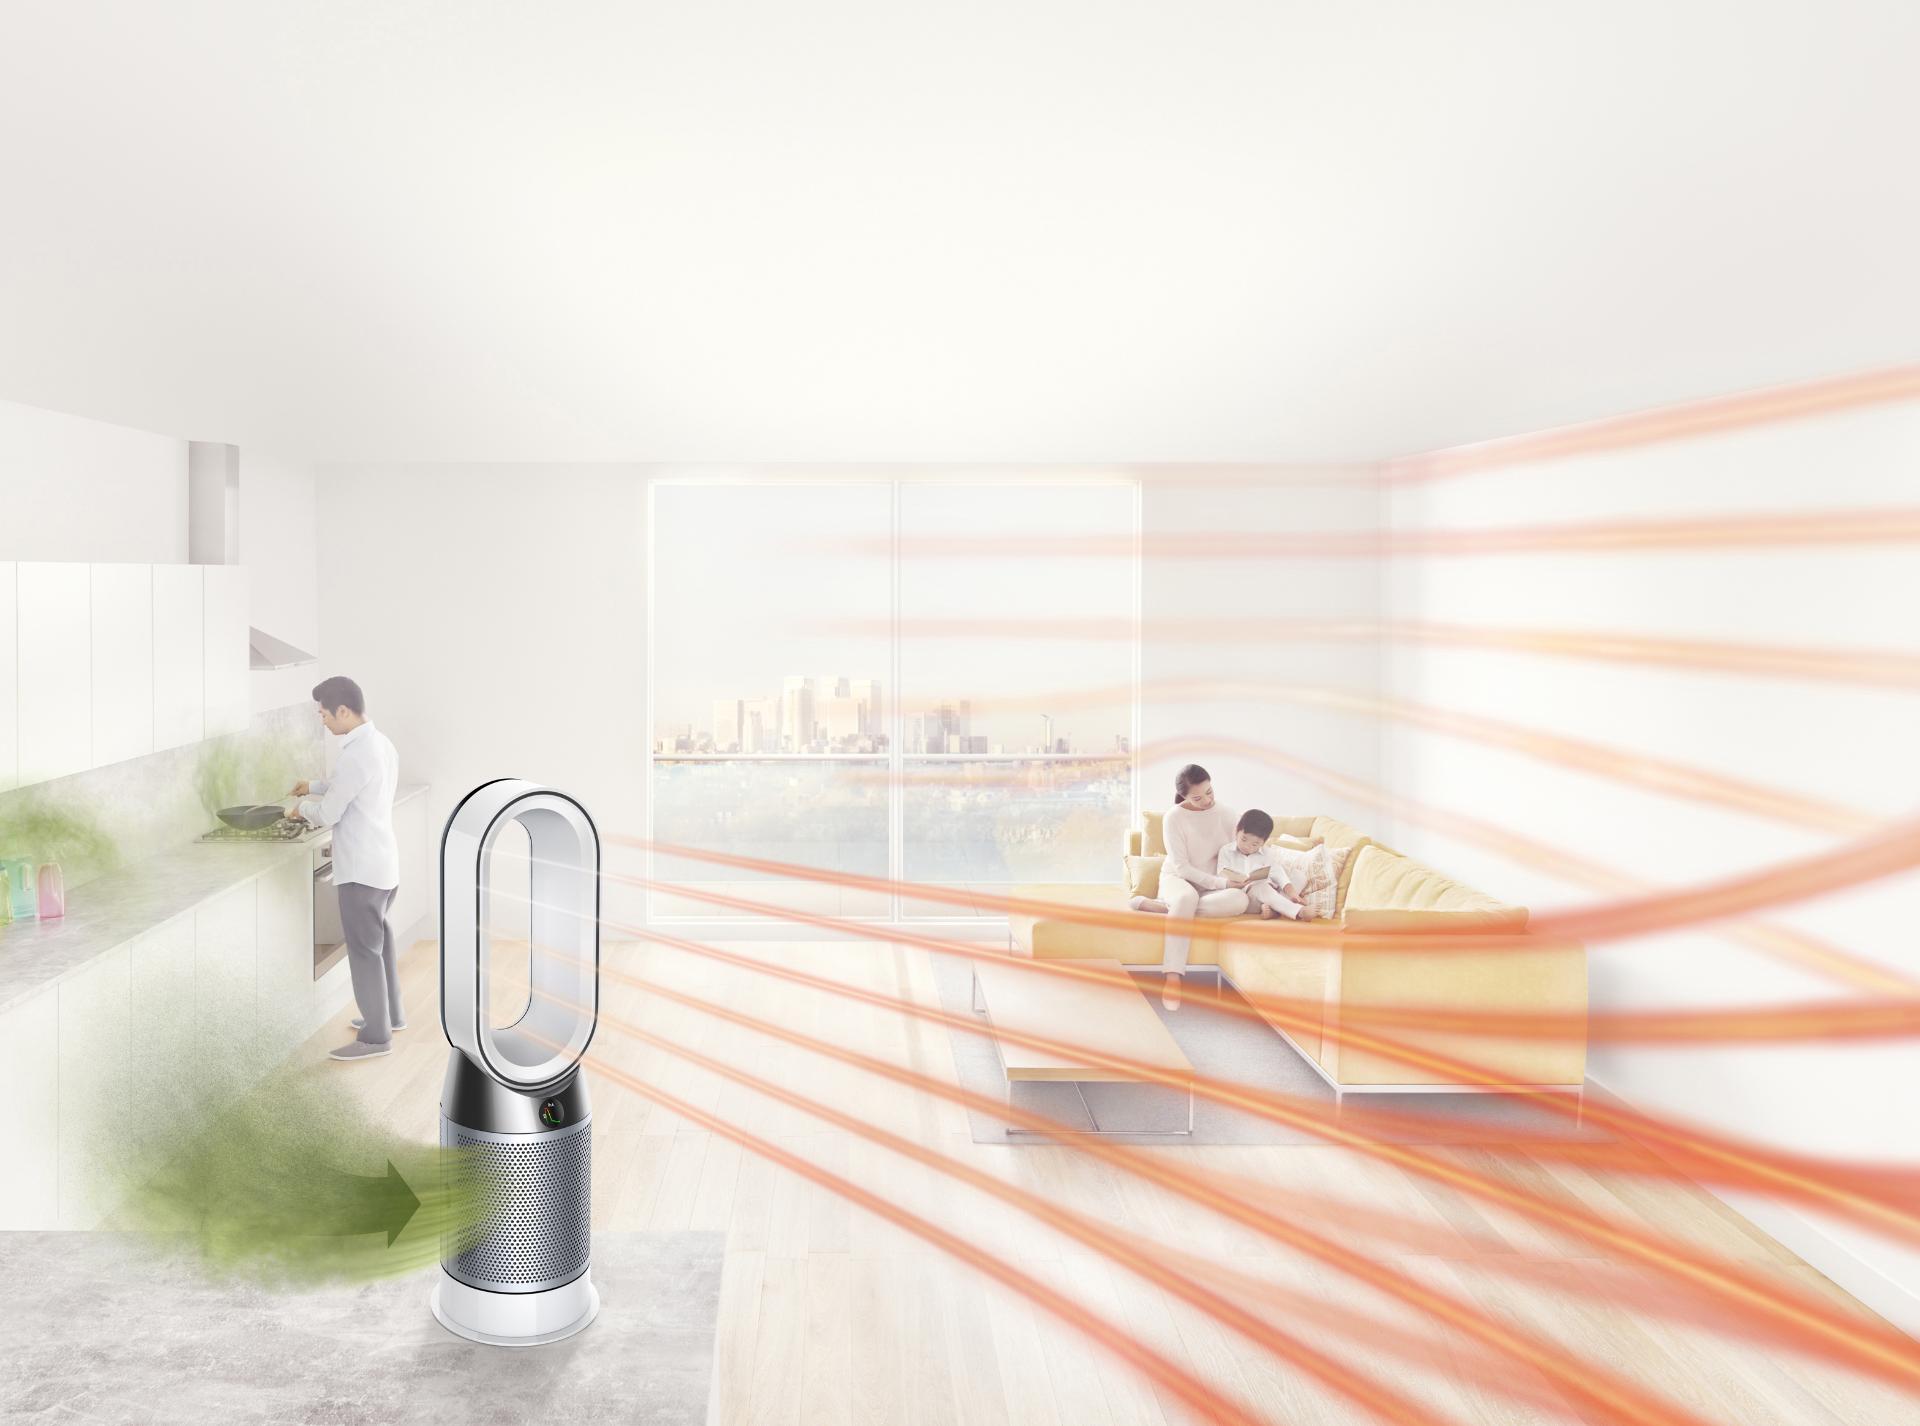 Dyson Pure Hot+Cool purifier being used indoors